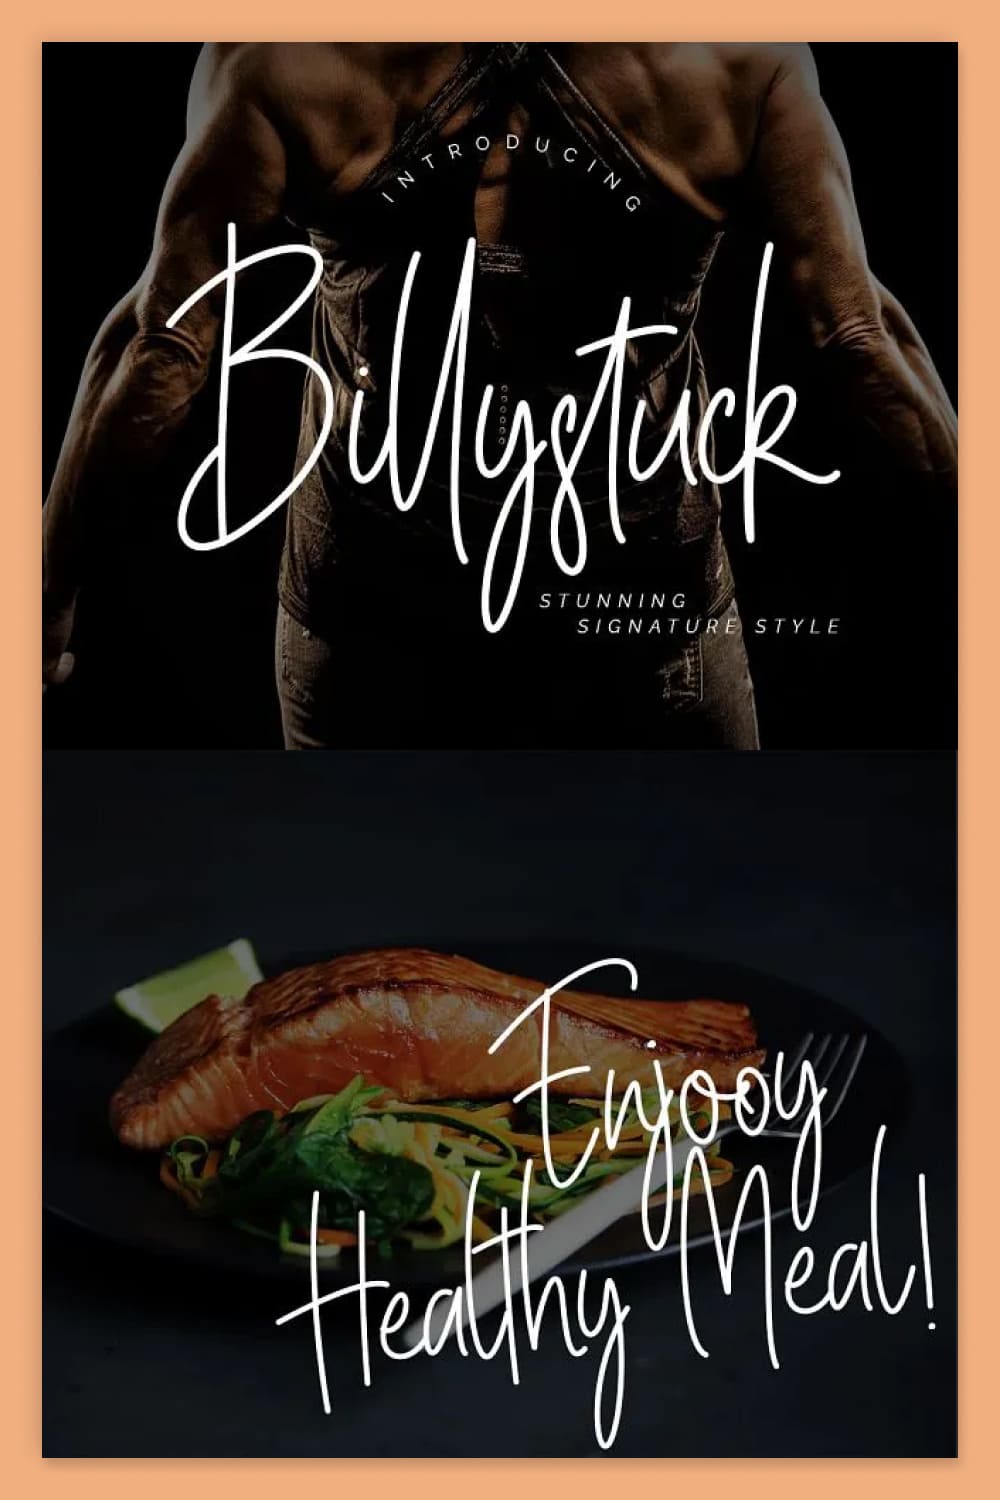 An example of writing a Billystuck Signature Font against the background of a dish with food and a bodybuilder.